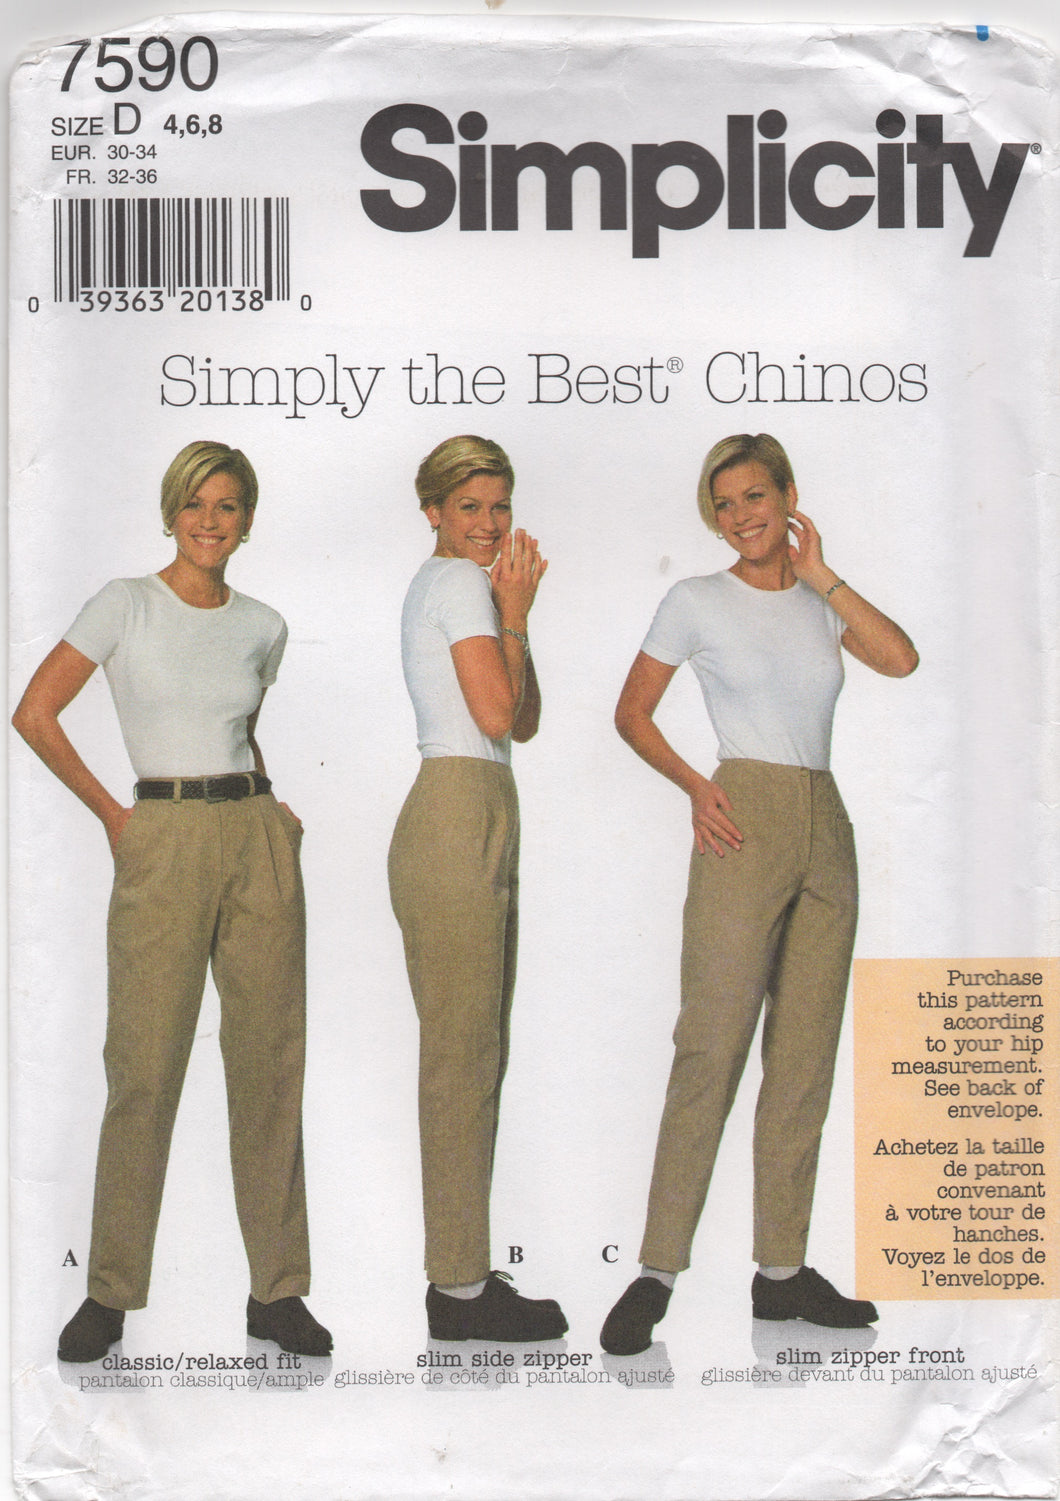 1997 Simplicity Simply the Best Chinos - Waist 23-24-25